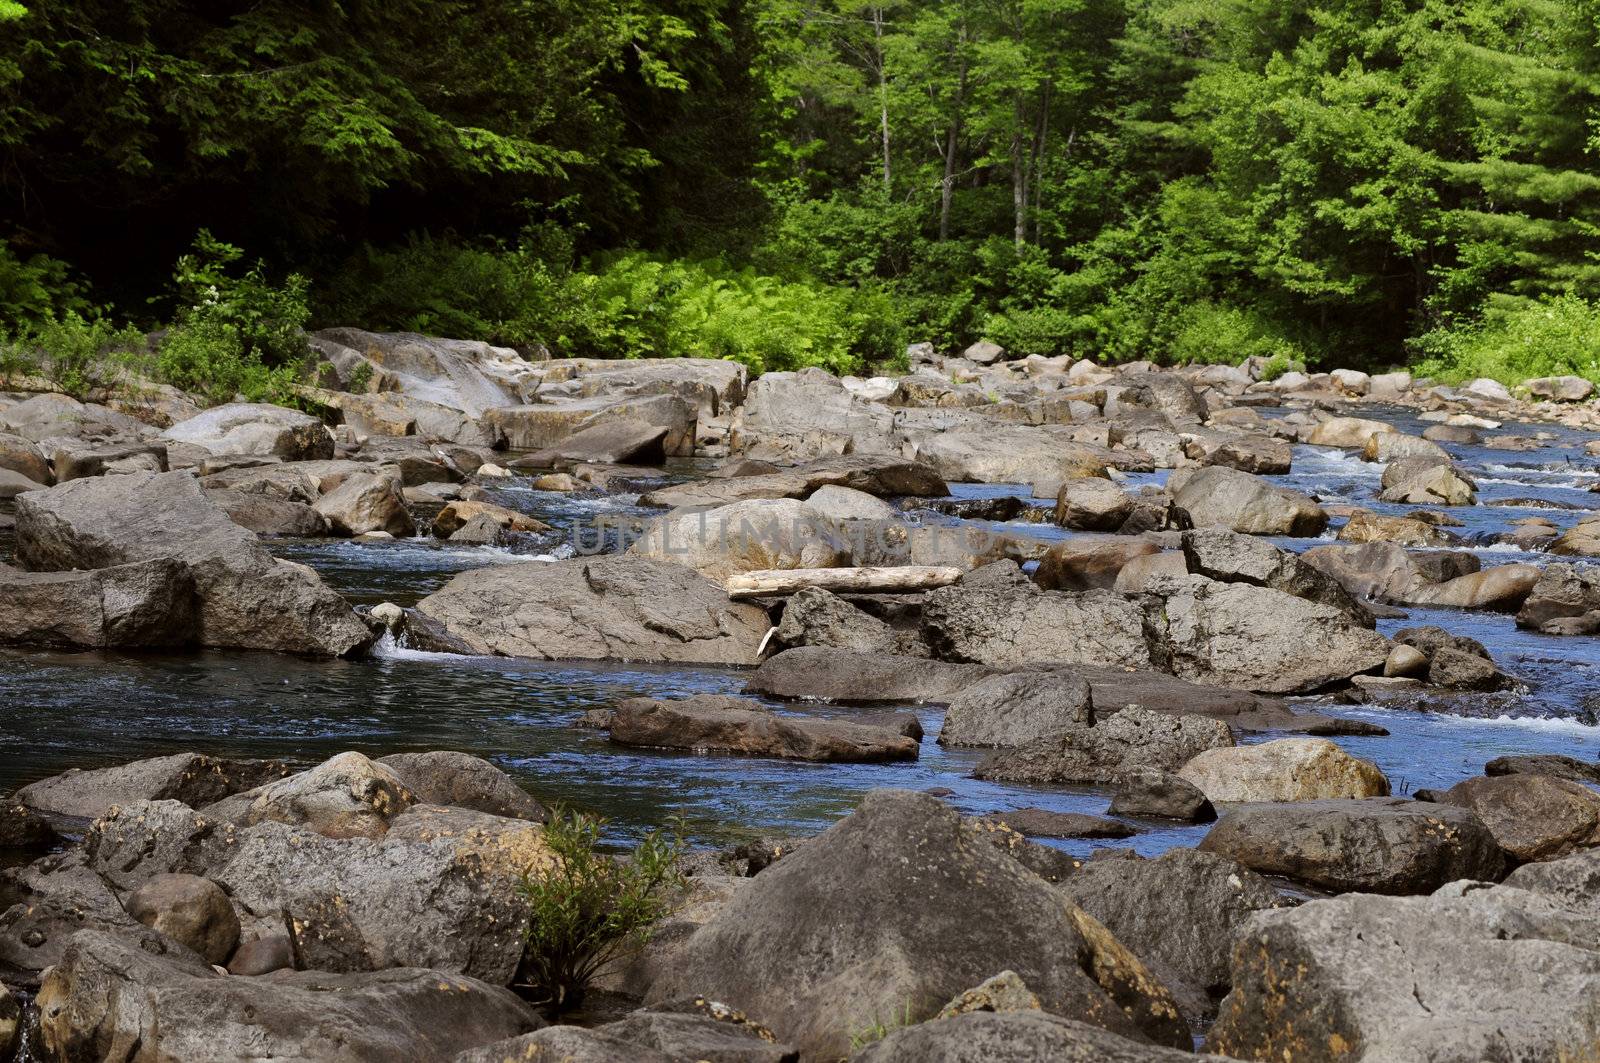 Rock-filled stream in the Adirondack mountains